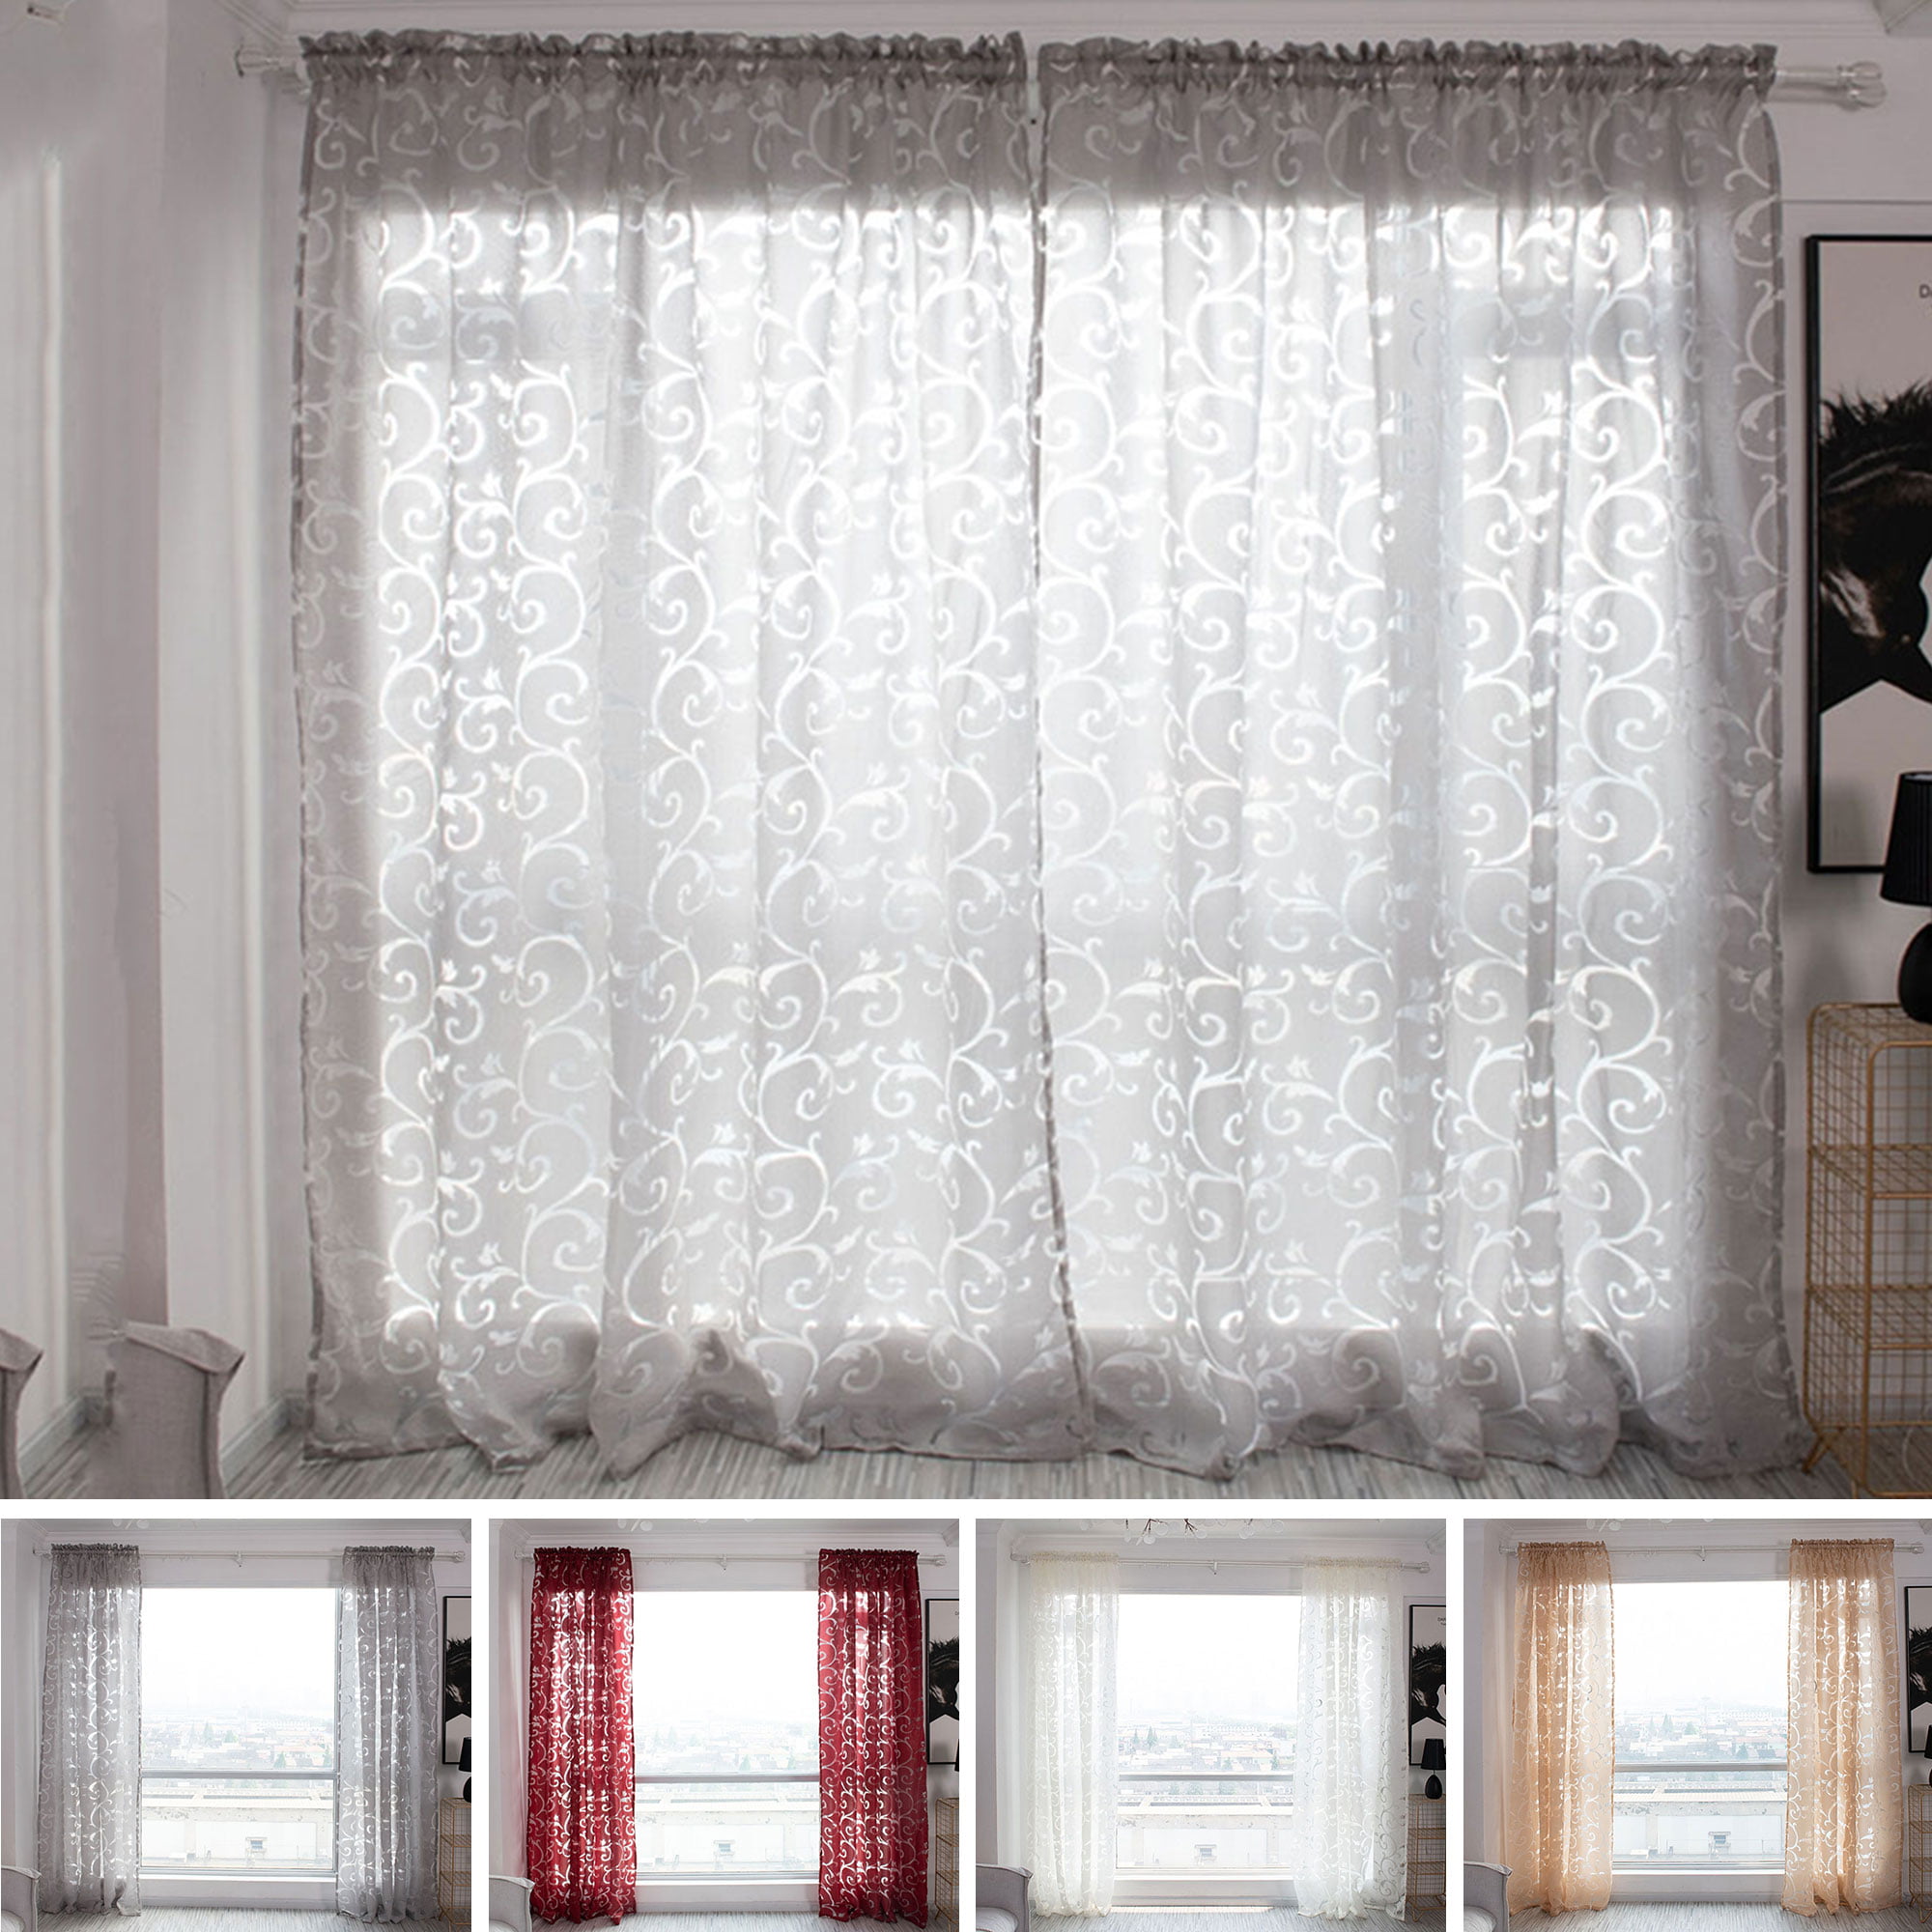 Modern Drapes Window Curtains For Living Room Floral Sheer Tulle For Bedroom New 